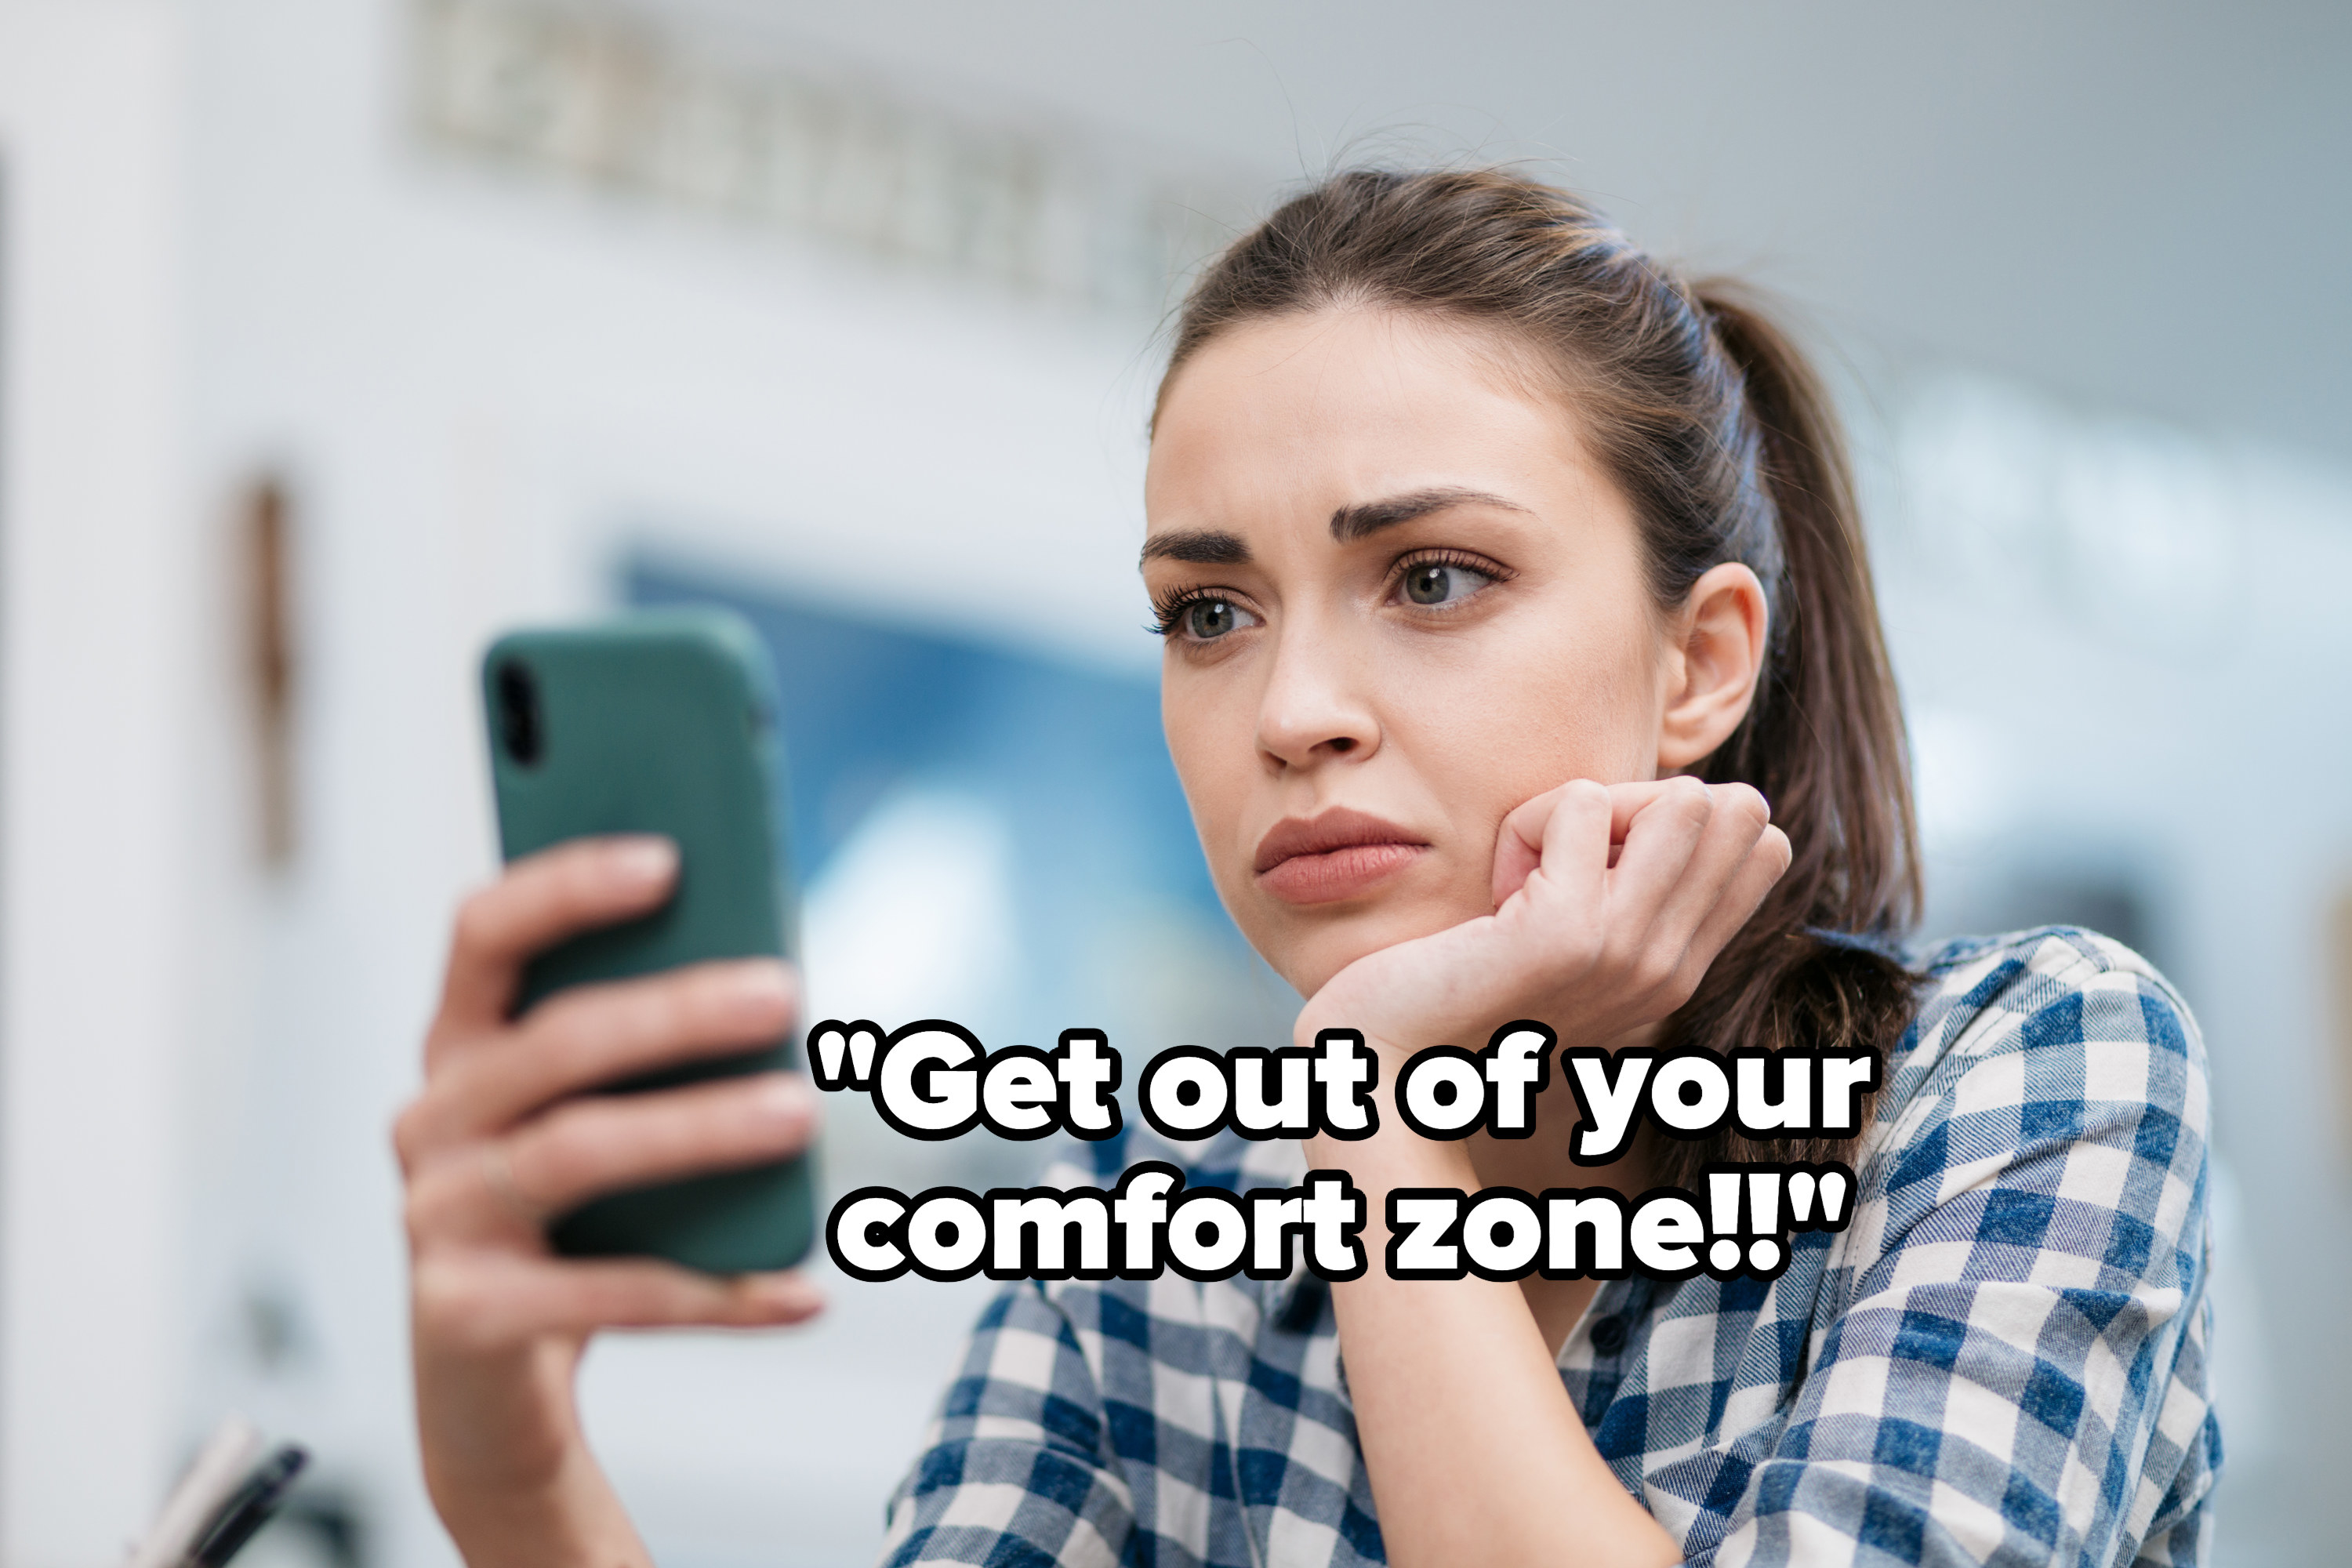 Woman&#x27;s phone yelling at her to get out of her comfort zone